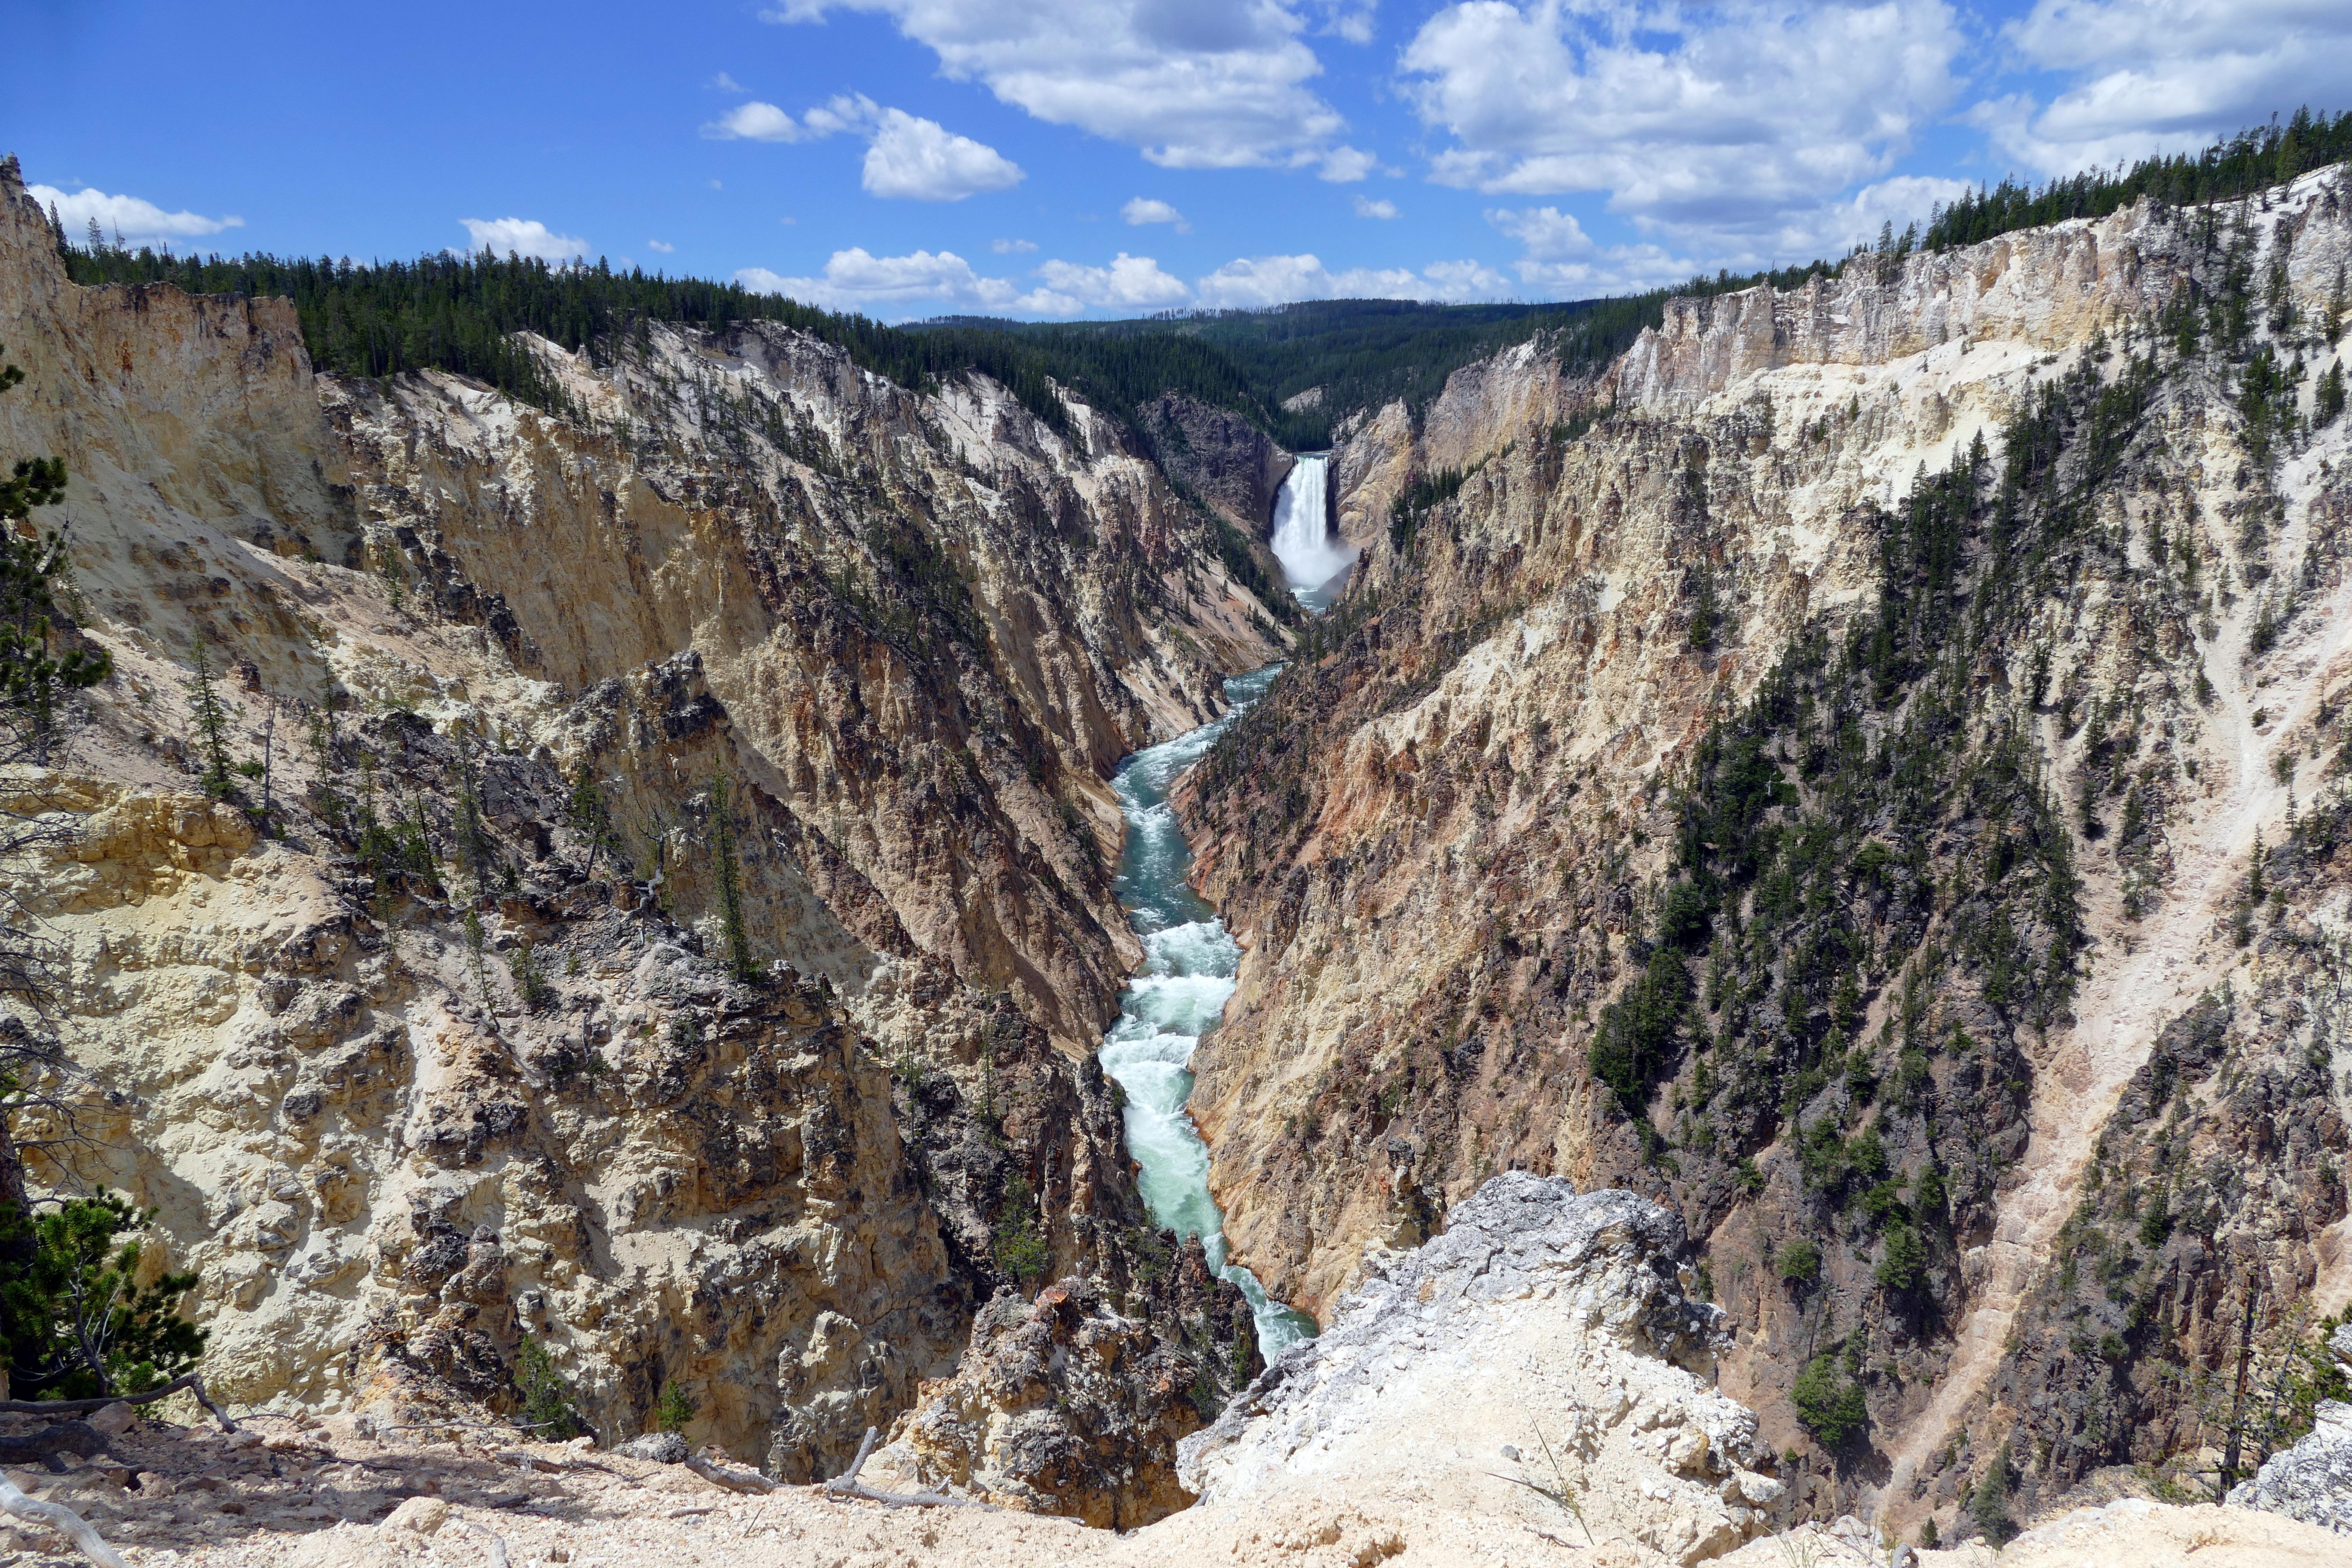 A river plunges into a steep, barren canyon.